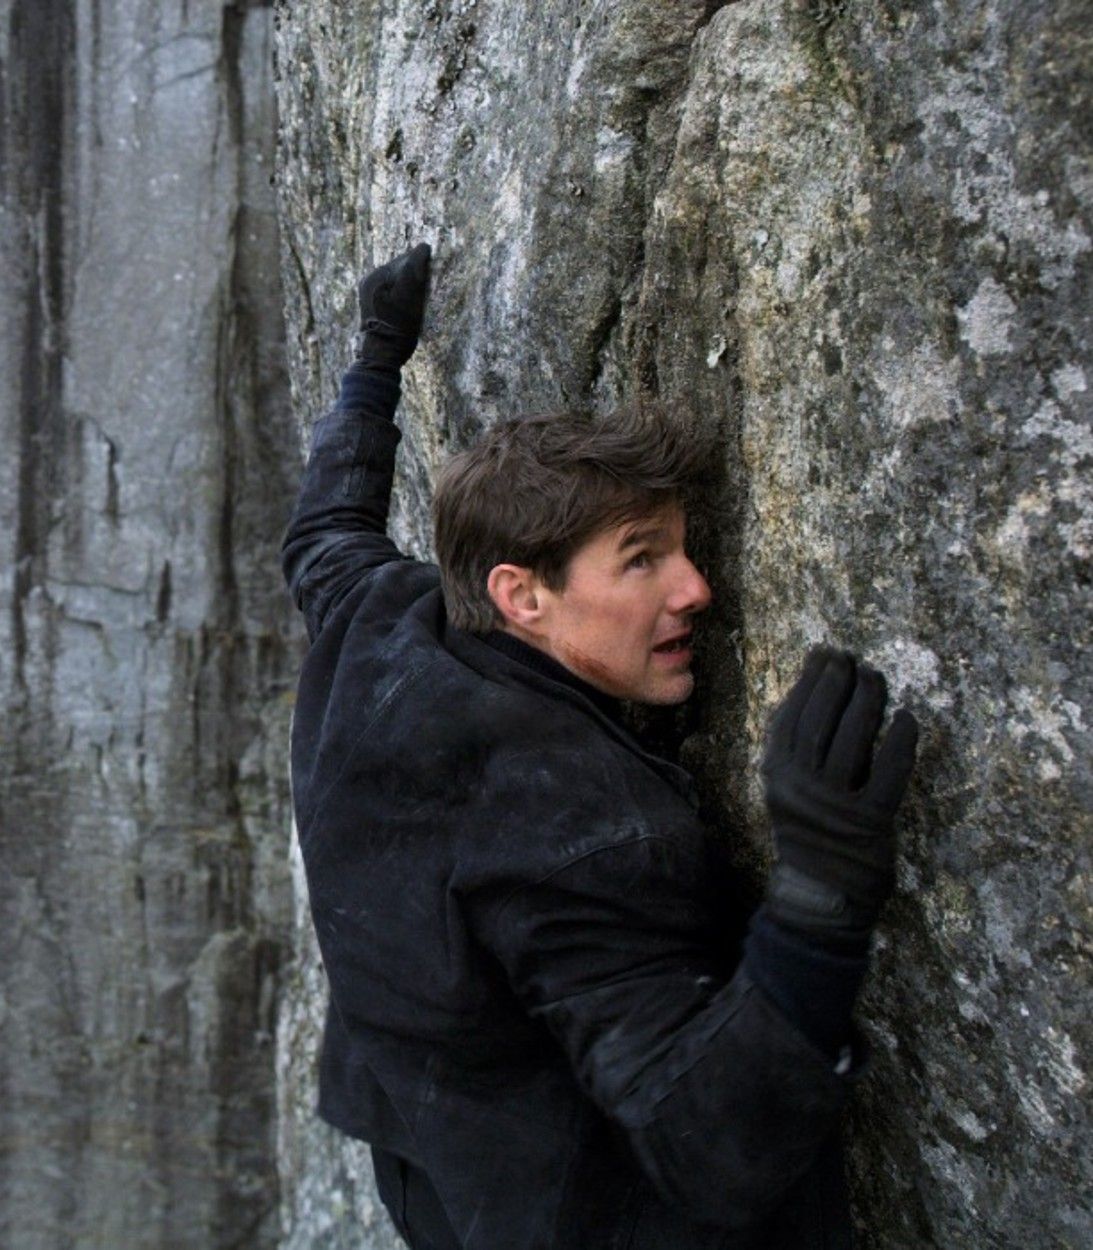 Mission Impossible Fallout pic vertical